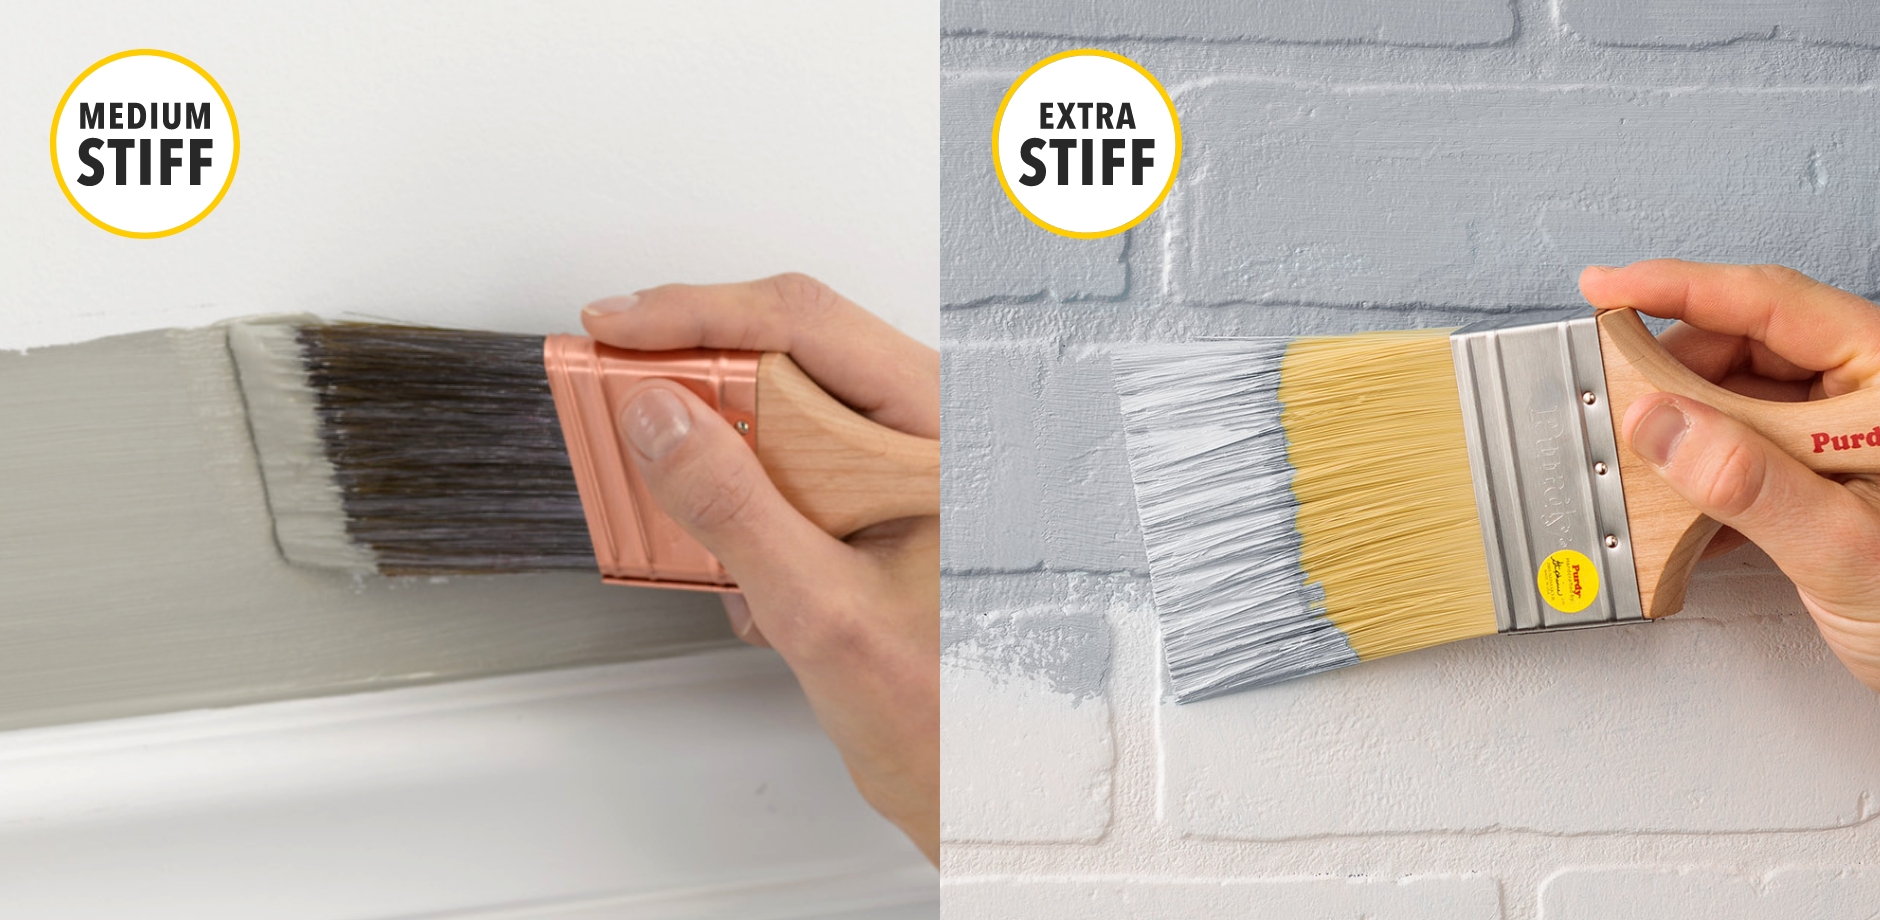 Cutting In Paint Brushes: The Best Ones to Buy